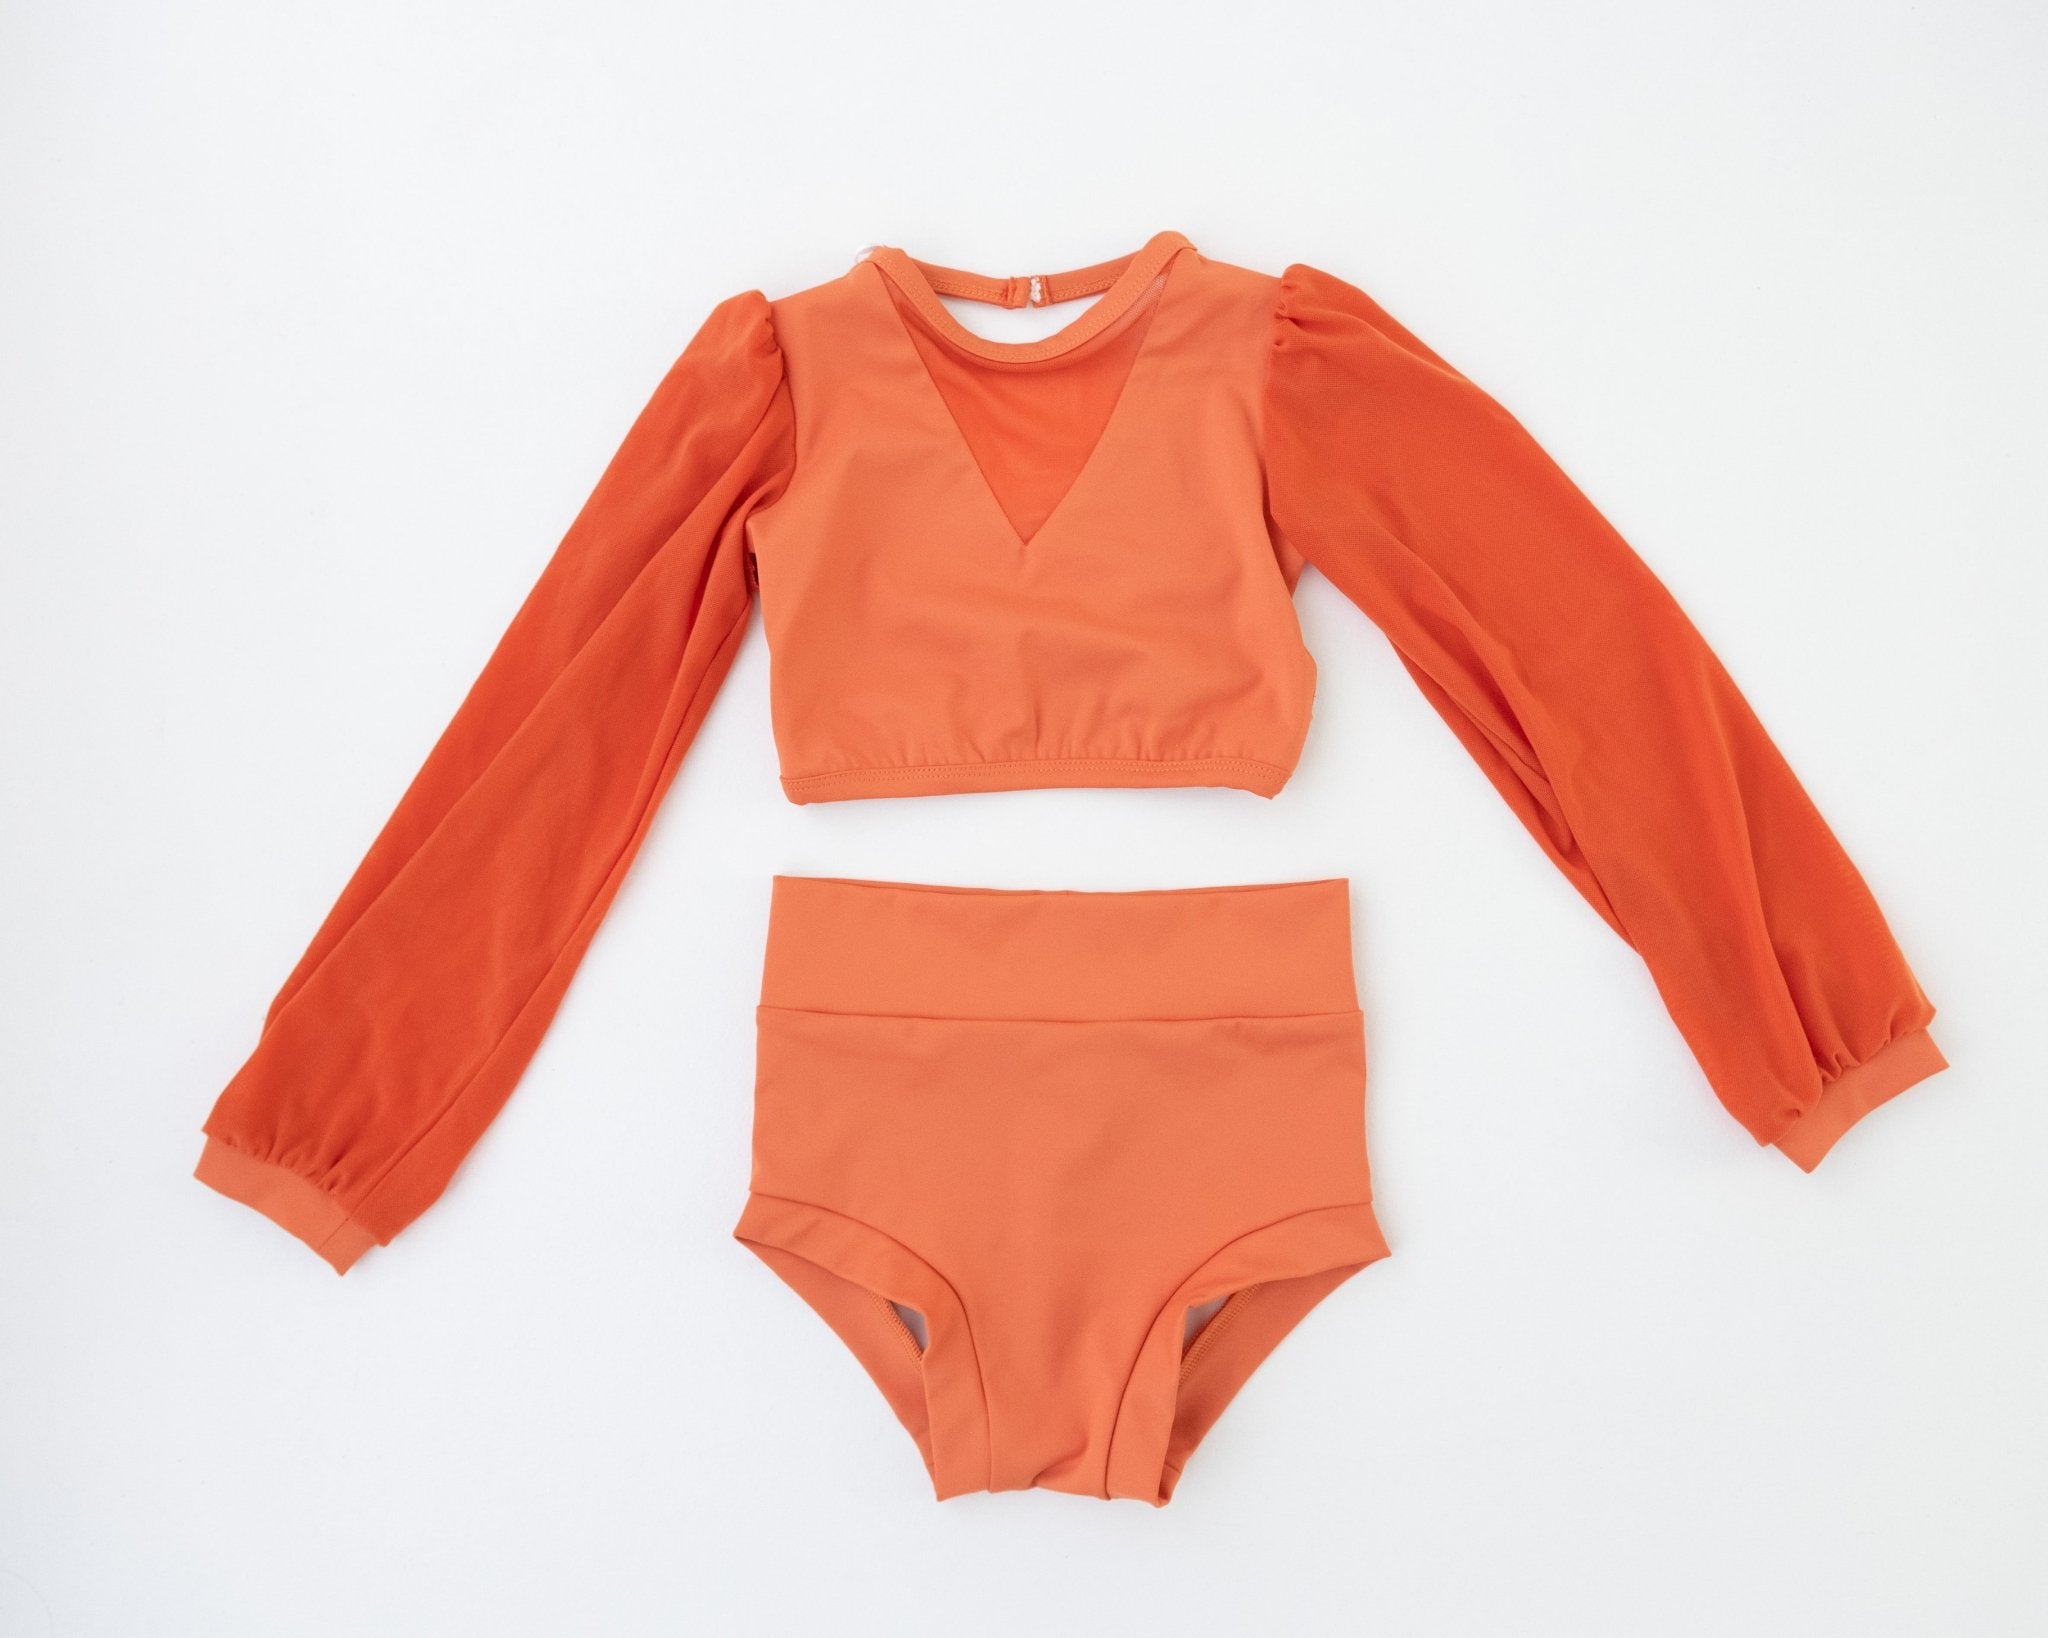 Perfect Poof Pumpkin Spice Long Sleeved Two Piece Dance Set - Evie's Closet Clothing